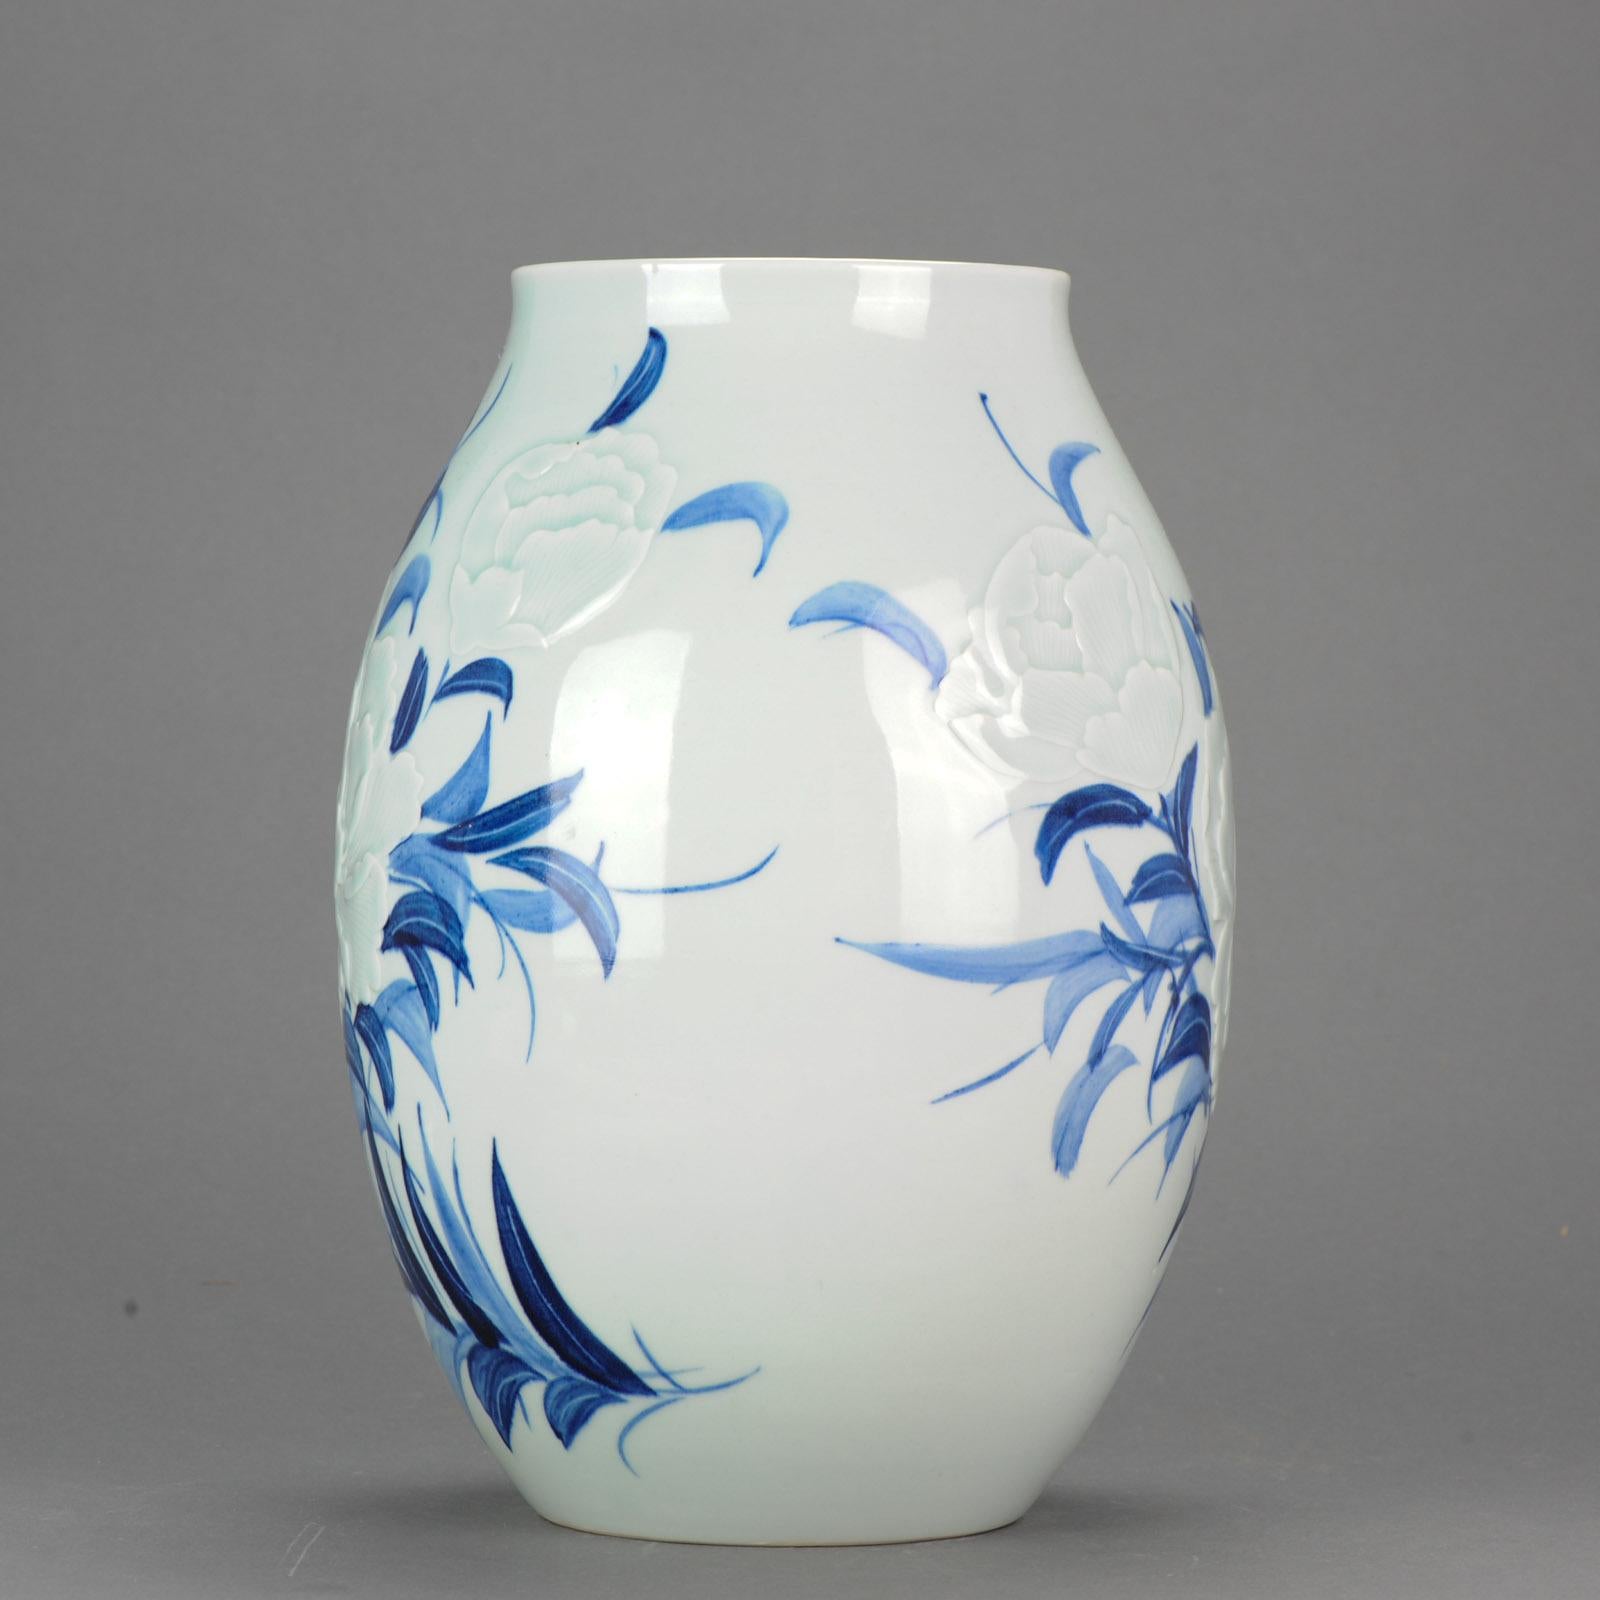 A blue and white porcelain vase, with relief decor of flowers. Dated 2001. Signed Wanglin (1972), Senior Art Artist in Jingdezhen, member of the Jingdezhen Ceramic Art Masters Association. China. H. 31 cm. ???????? “??” ??:2001?